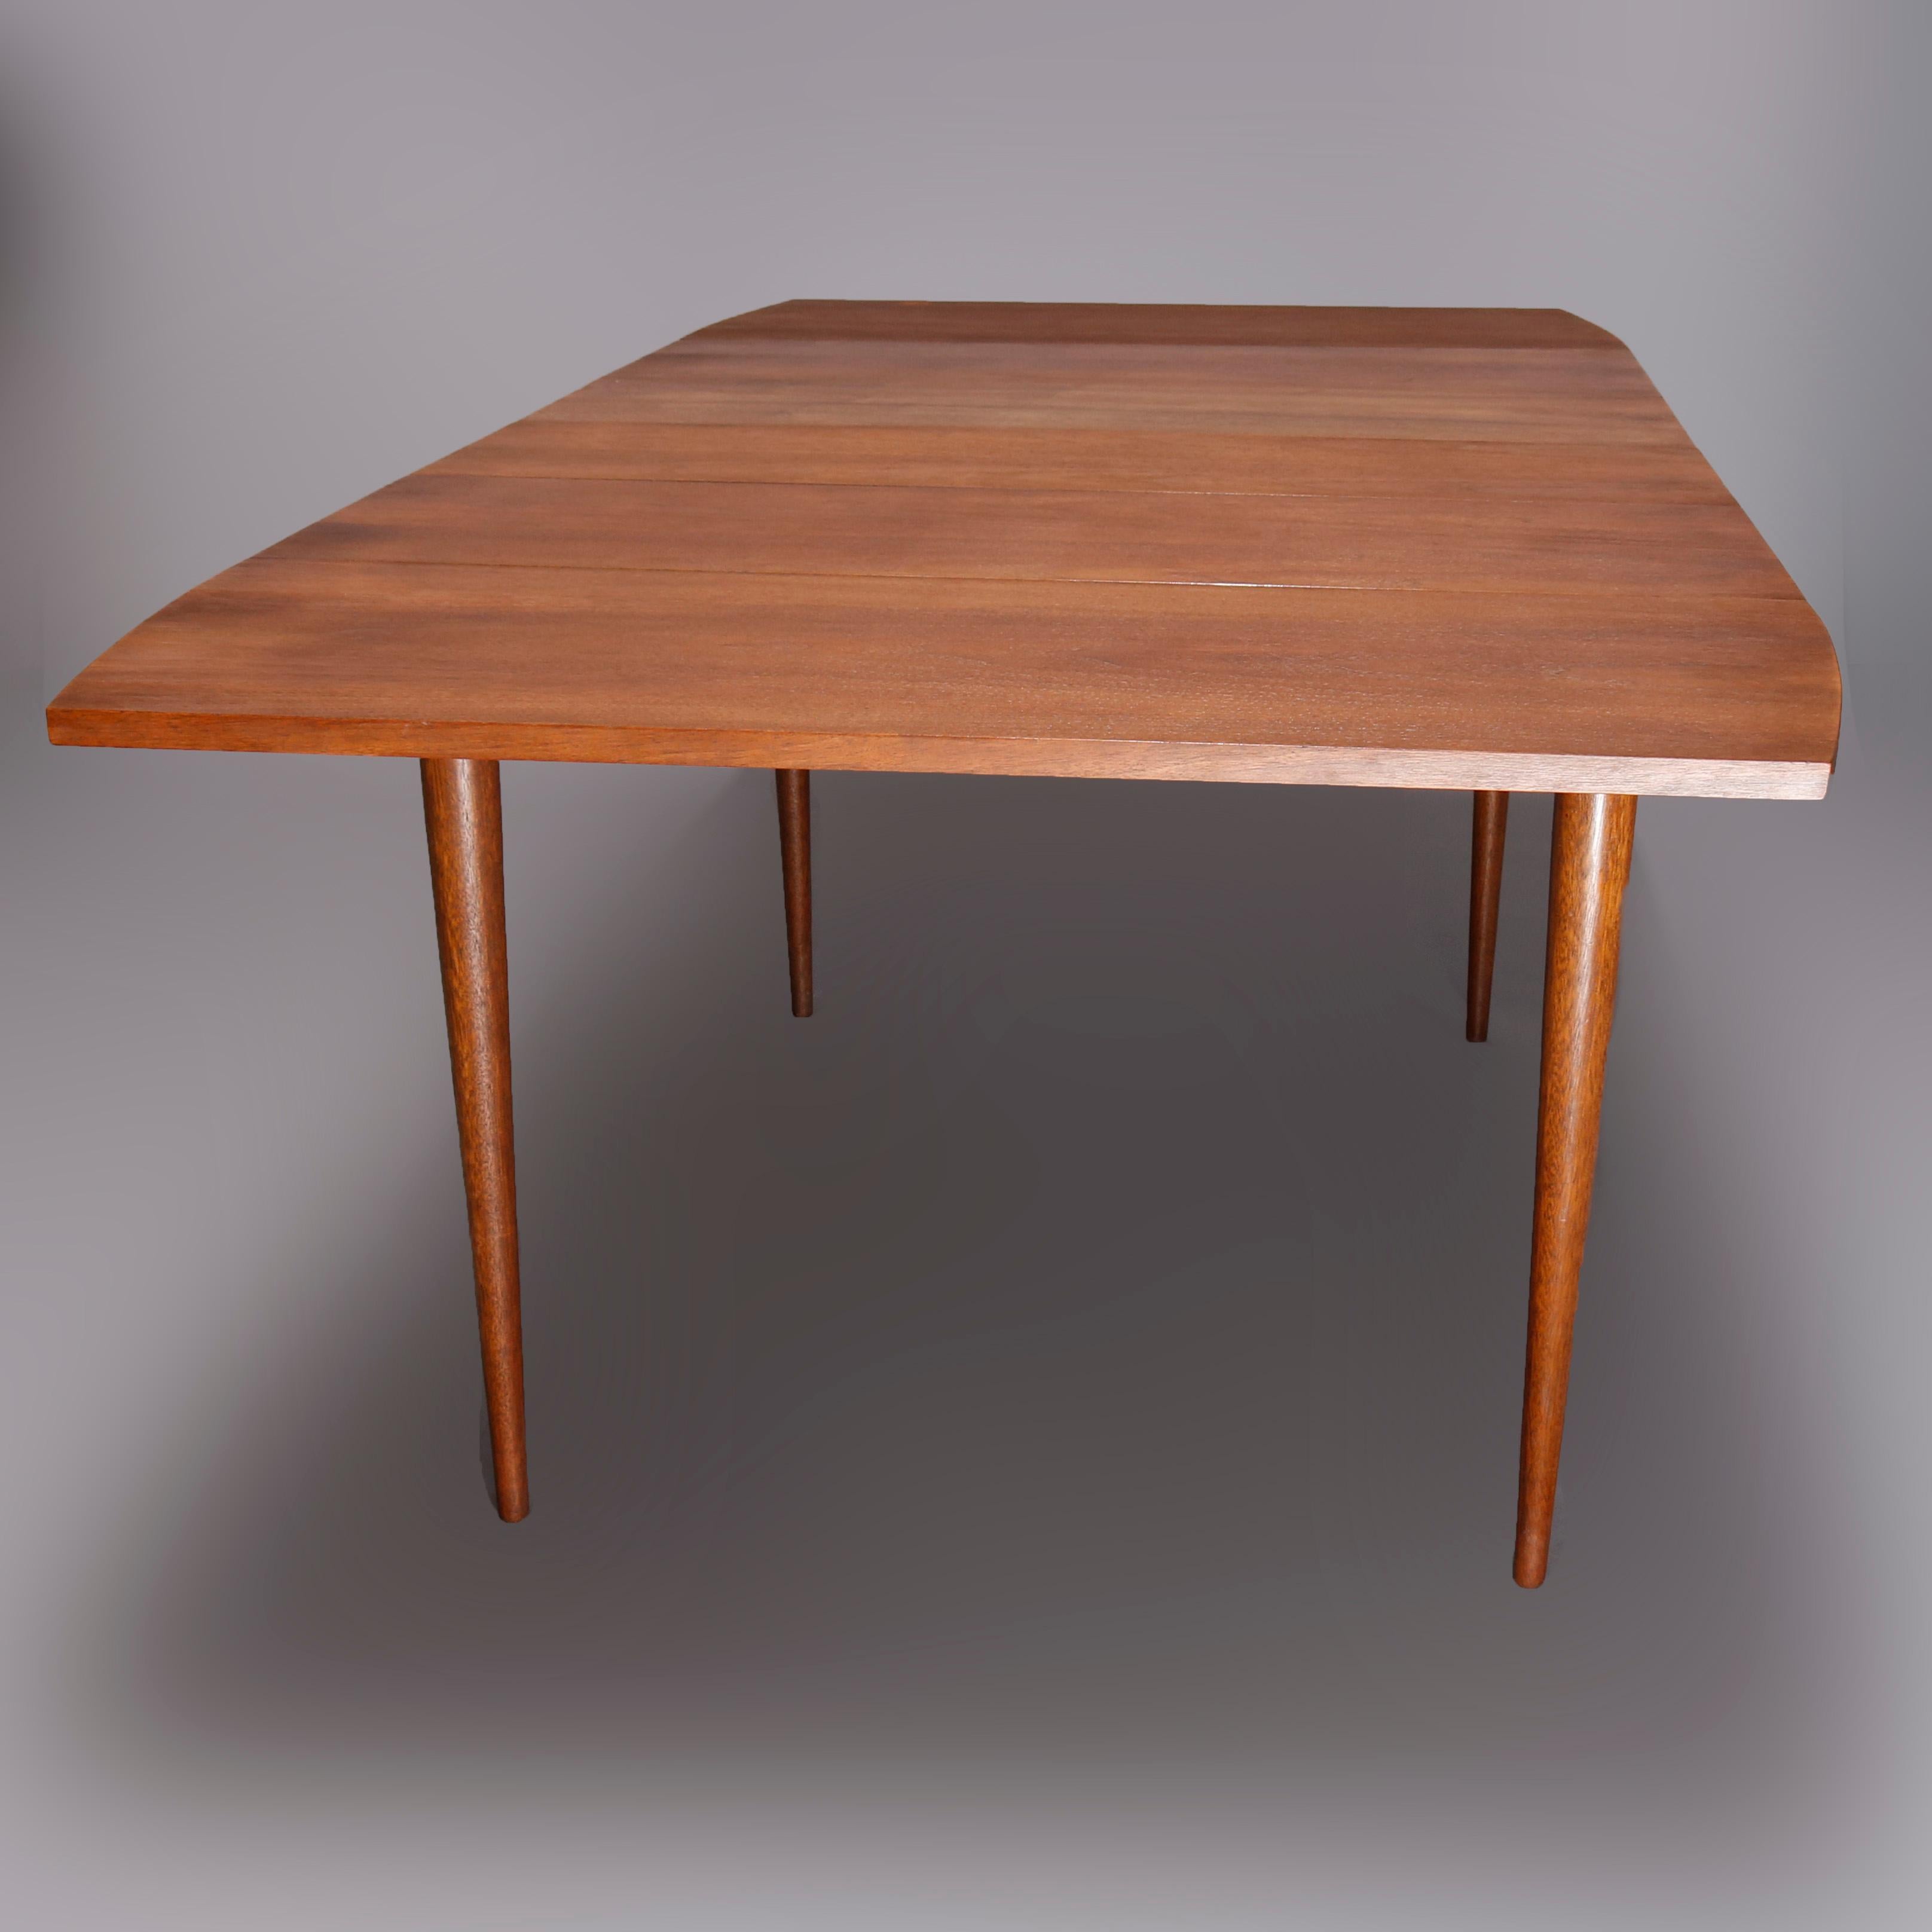 Upholstery Midcentury Danish Modern Walnut Dining Table & Chairs by Broyhill, 20th Century